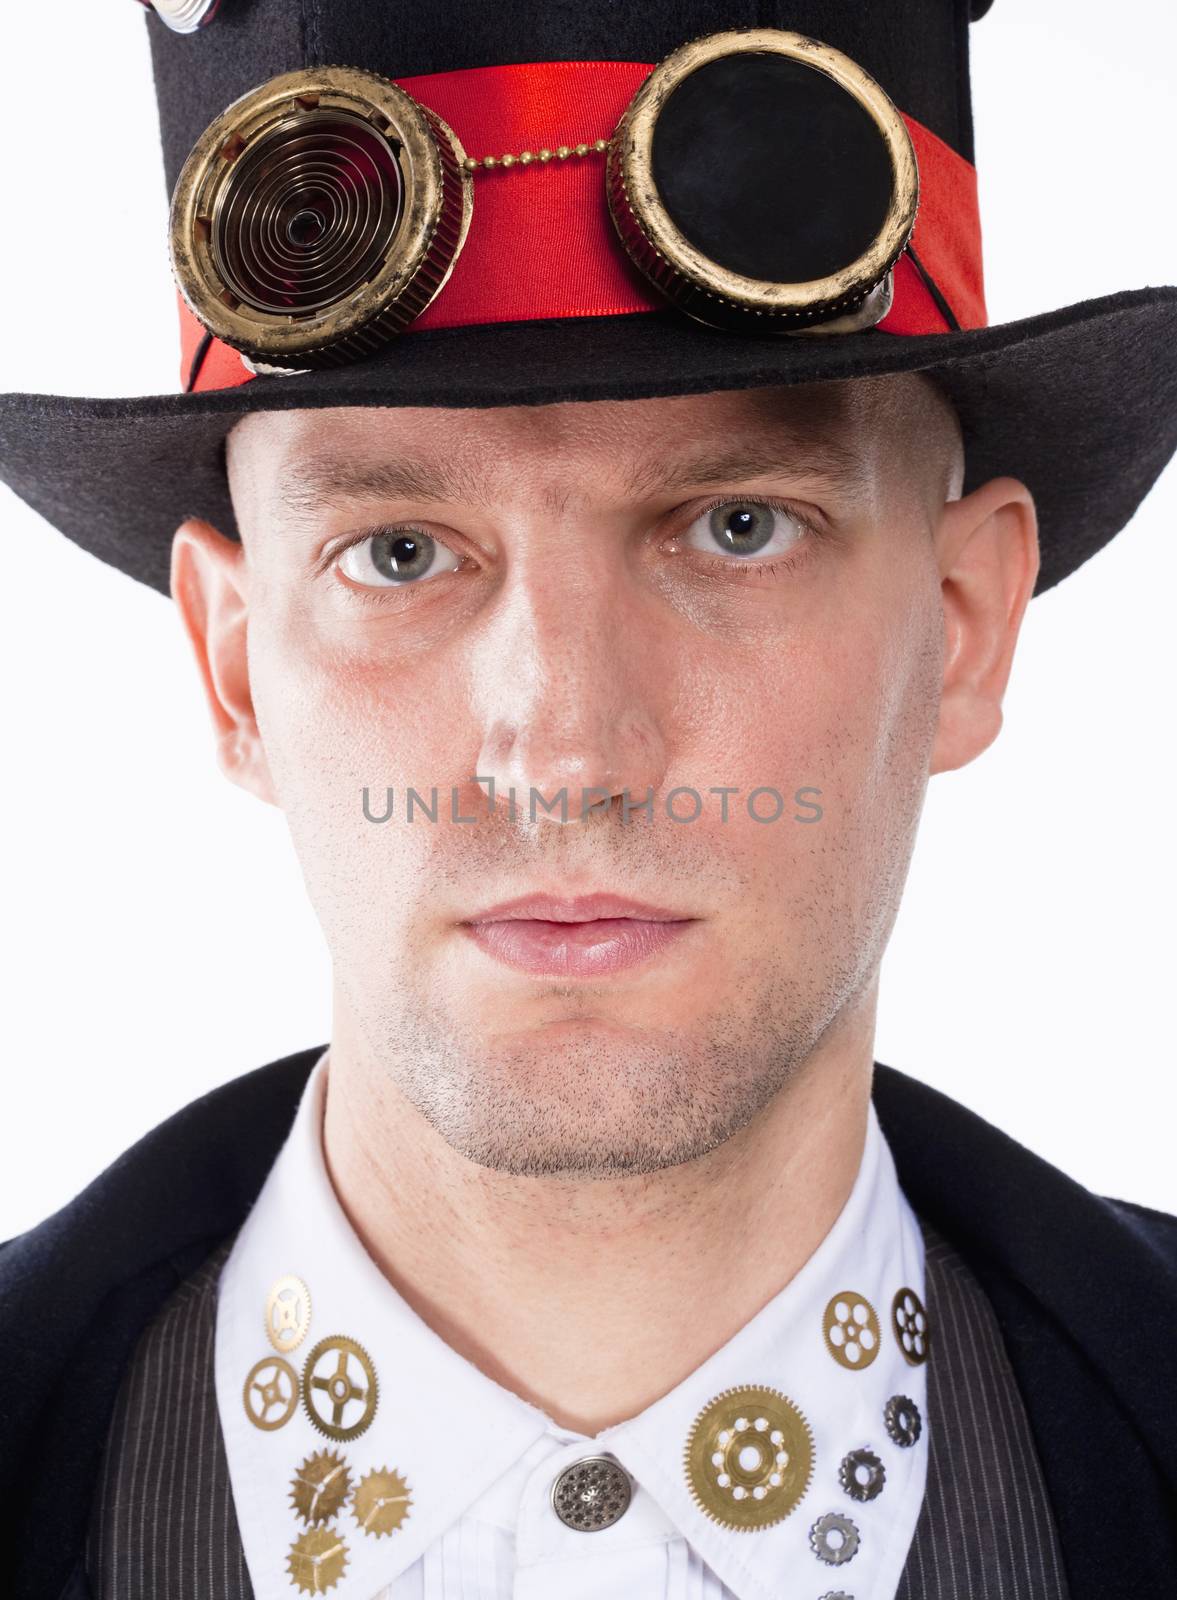 Portrait of a Magician with High Hat and Clock Parts Details by courtyardpix